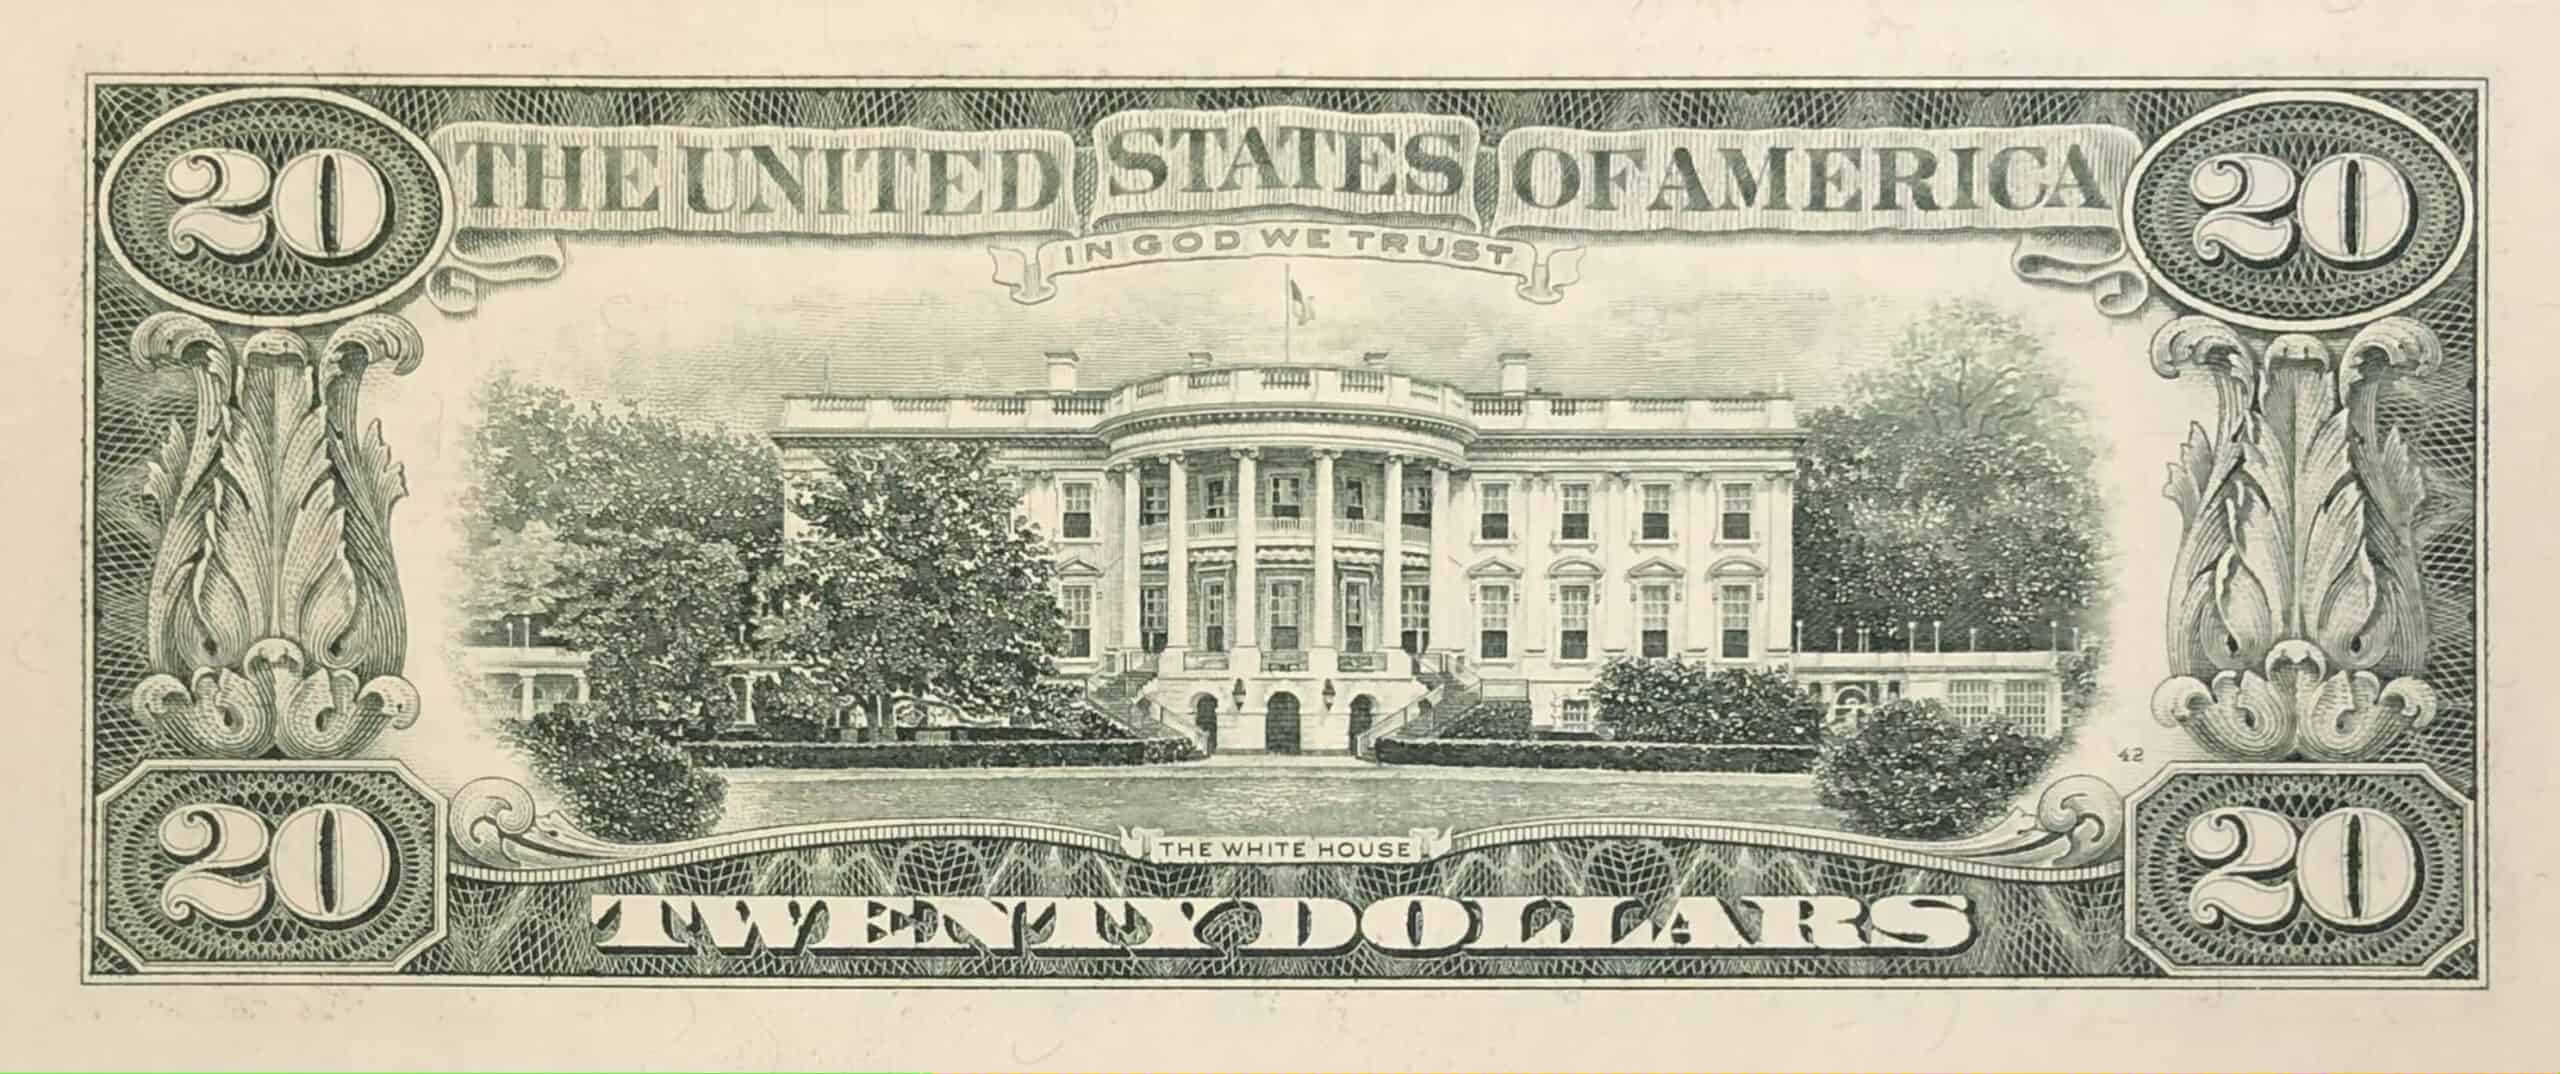 The Reverse of the 1993 20 Dollar Bill